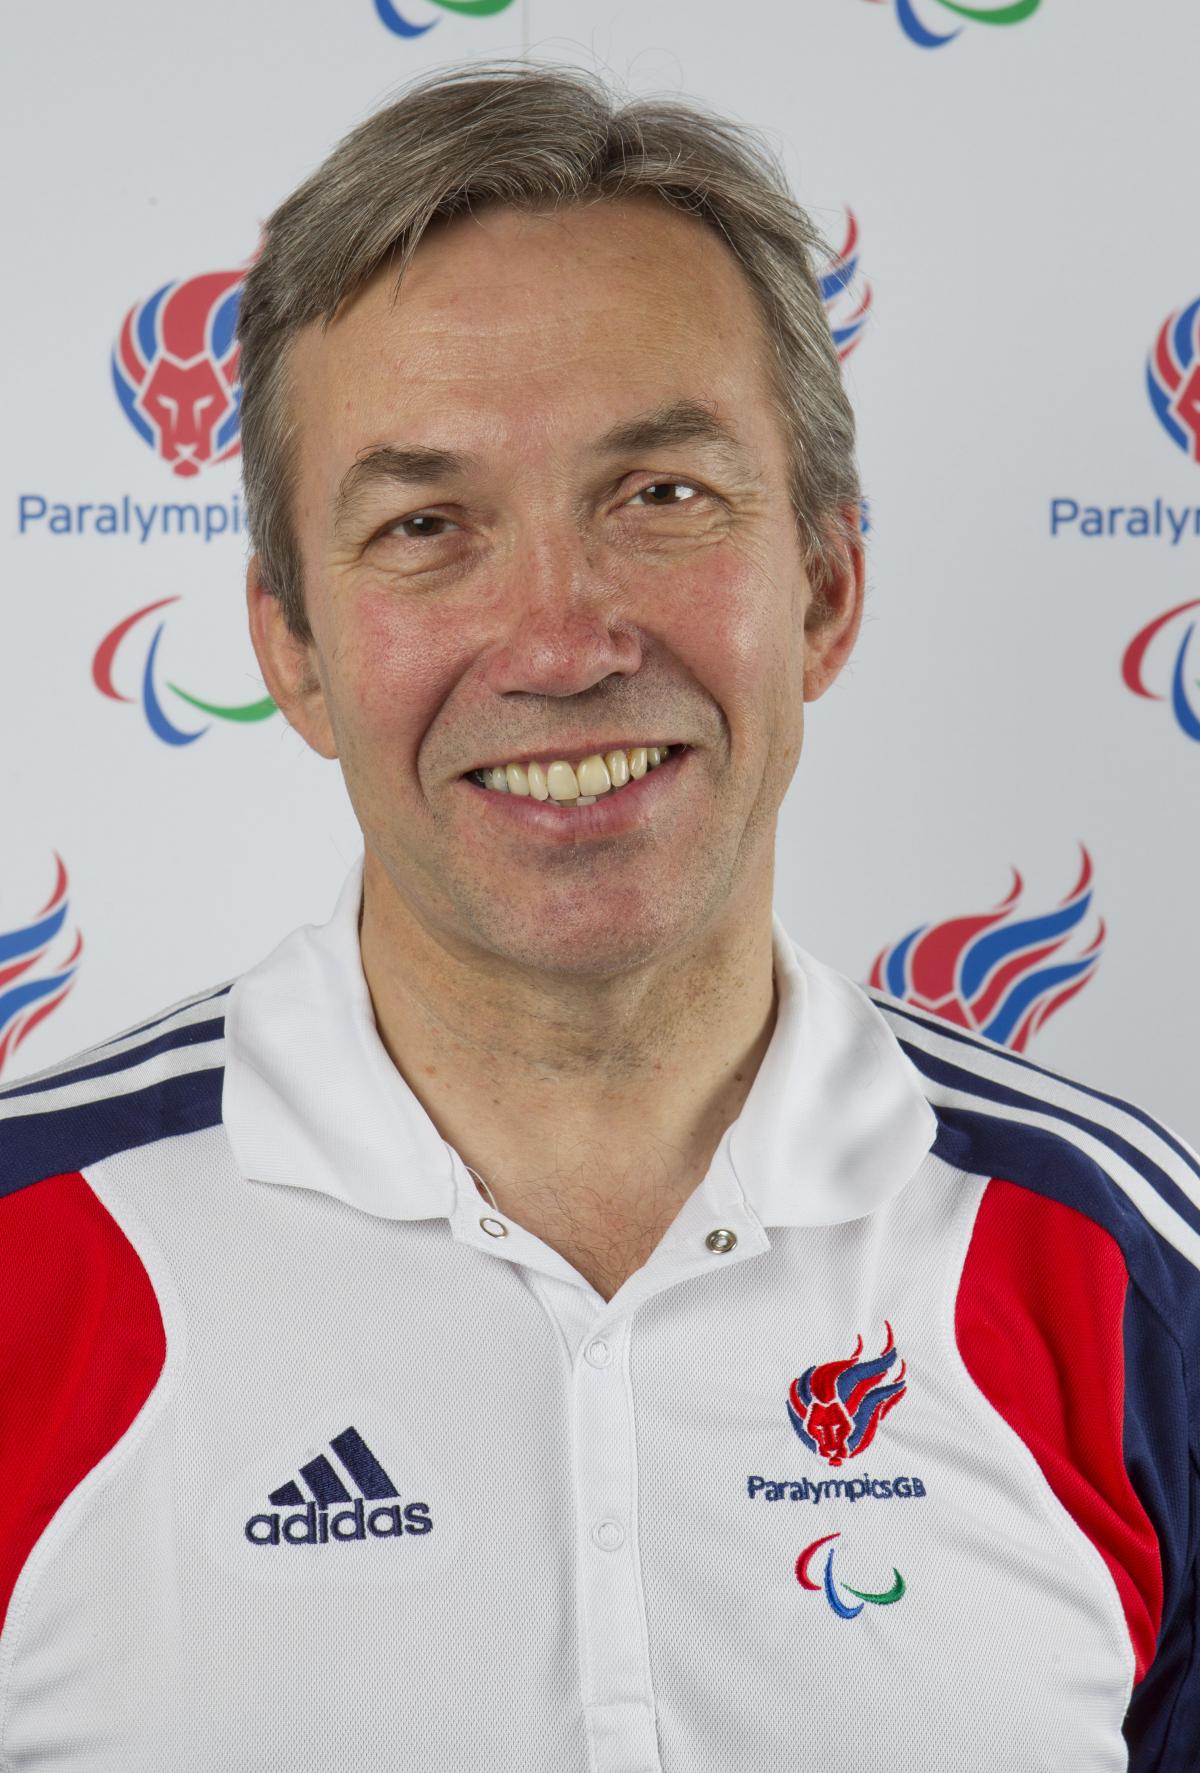 Nick Webborn wears the ParalympicsGB uniform whilst he smiles to the camera.